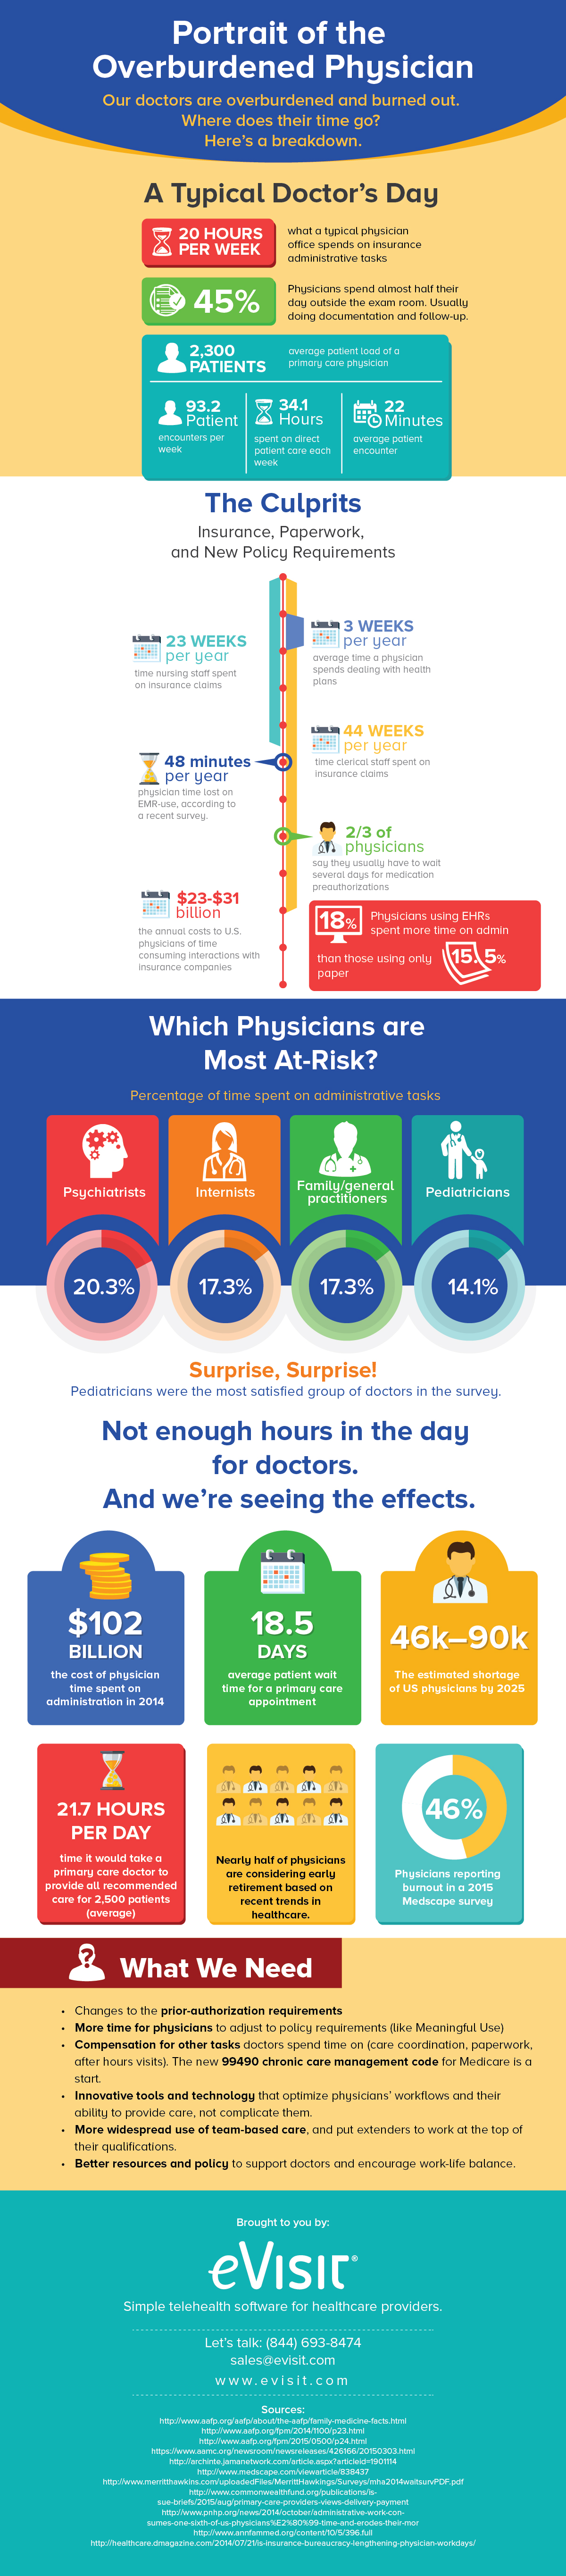 What Does the Average Physician's Day Look Like